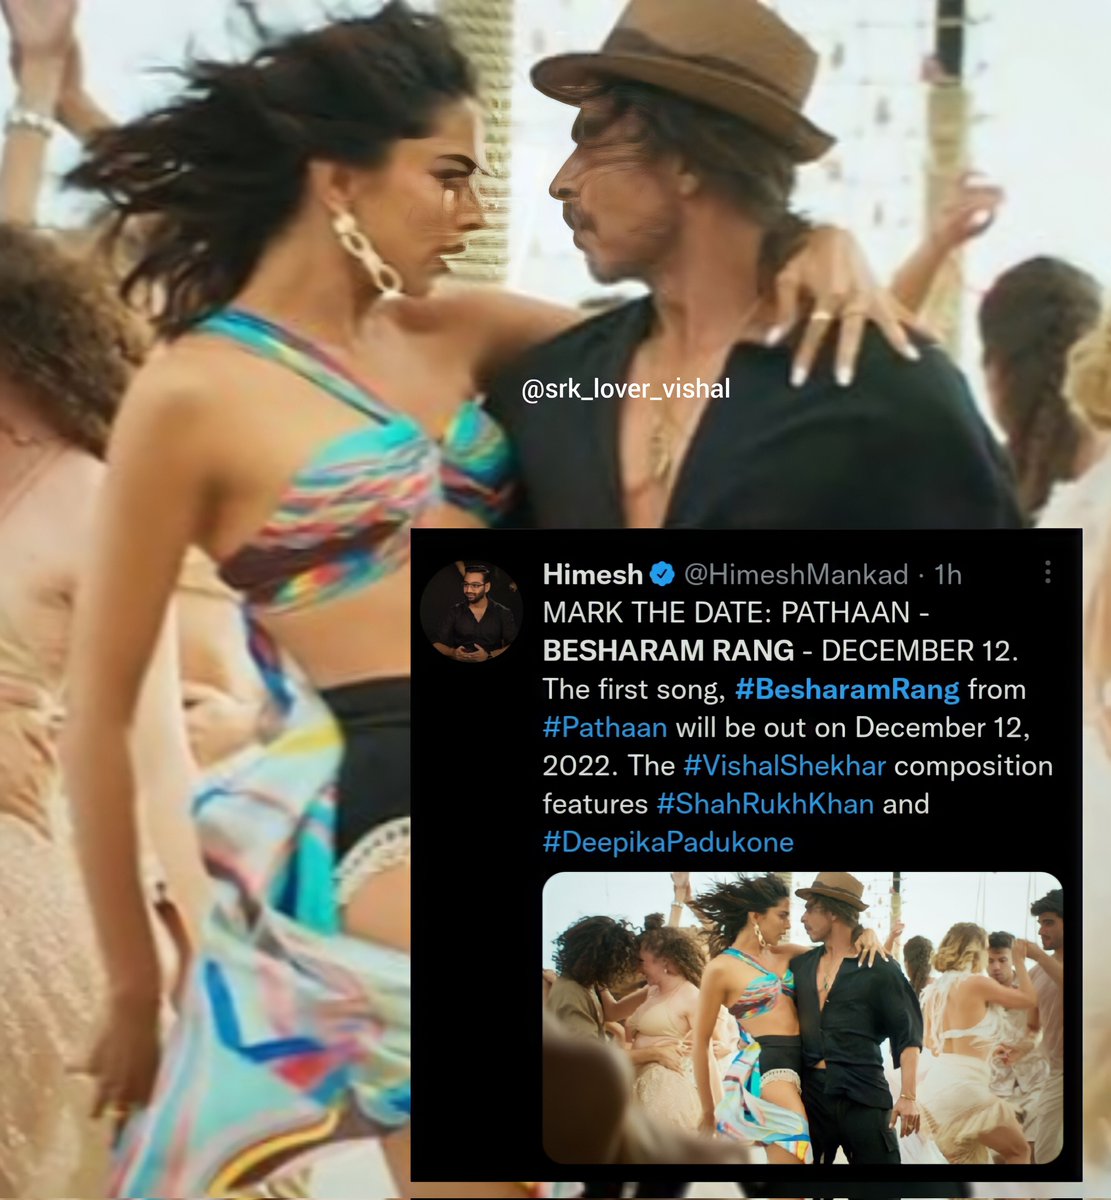 Latest Tweet of @HimeshMankad
The first song, #BesharamRang will be out on 12, 2022..😍🔥

We all are waiting for..💥

#ShahRukhKhan𓀠  #Pathaan
#Pathaansong #DeepikaPadukone  #VishalShekhar  #Pathaansong
#BesharamRang  #himeshmankad  #Tweet #srklovervishal #srklovervishaledits